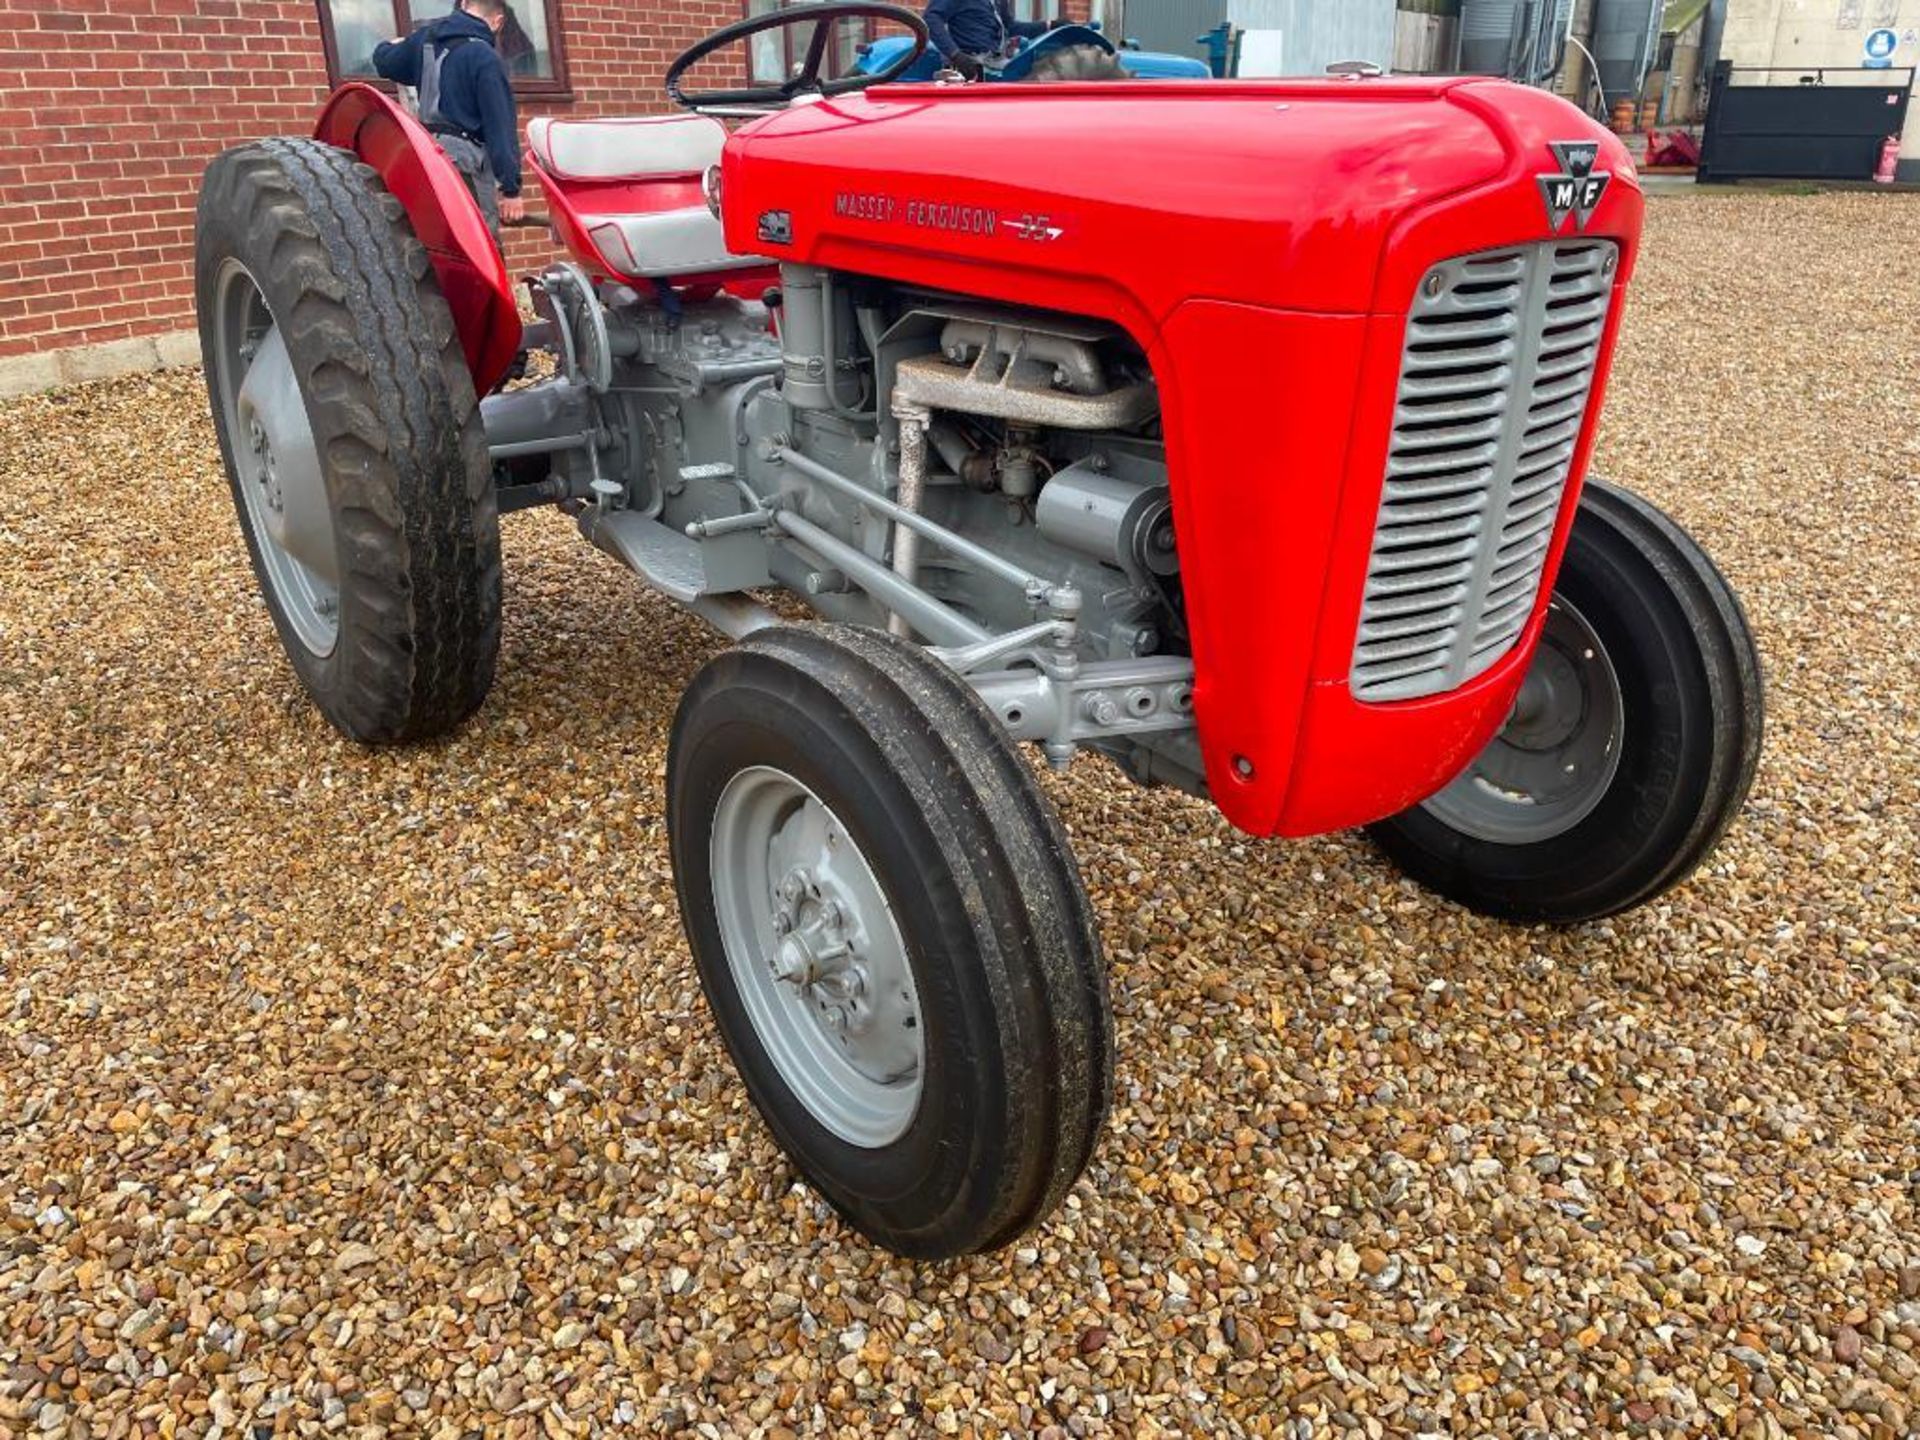 1962 Massey Ferguson 35 Industrial petrol 2wd tractor on 6.00-16 front and 10.00-28IND rear wheels a - Image 14 of 19